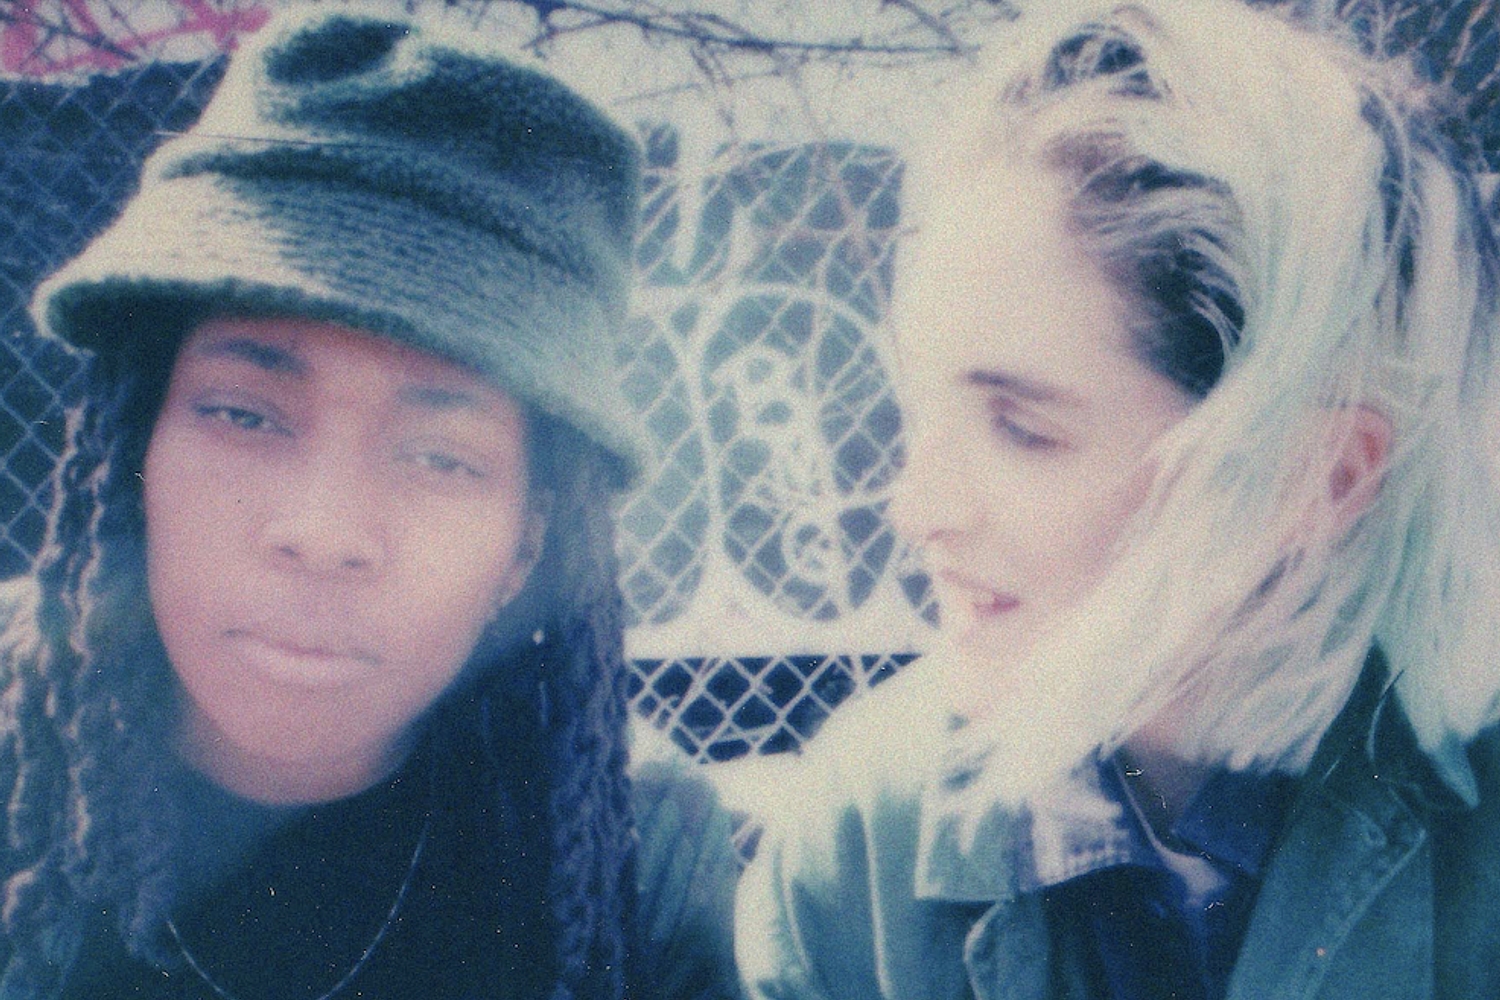 Shura teams up with rapper Ivy Sole on new song ‘elevator girl’